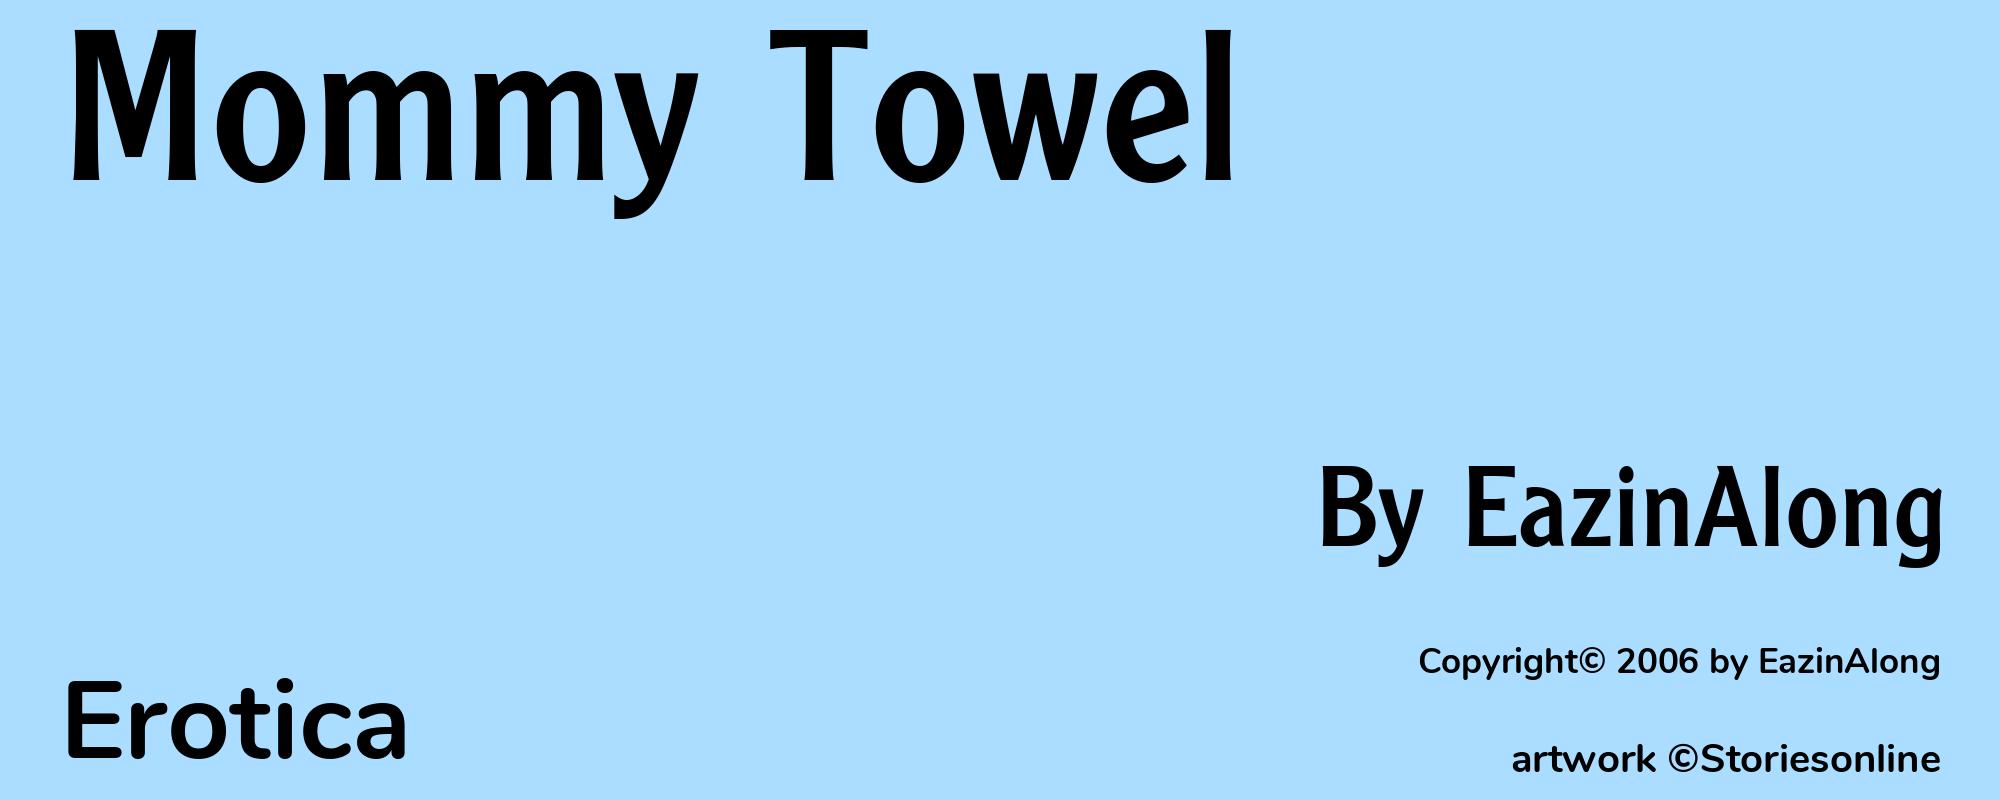 Mommy Towel - Cover